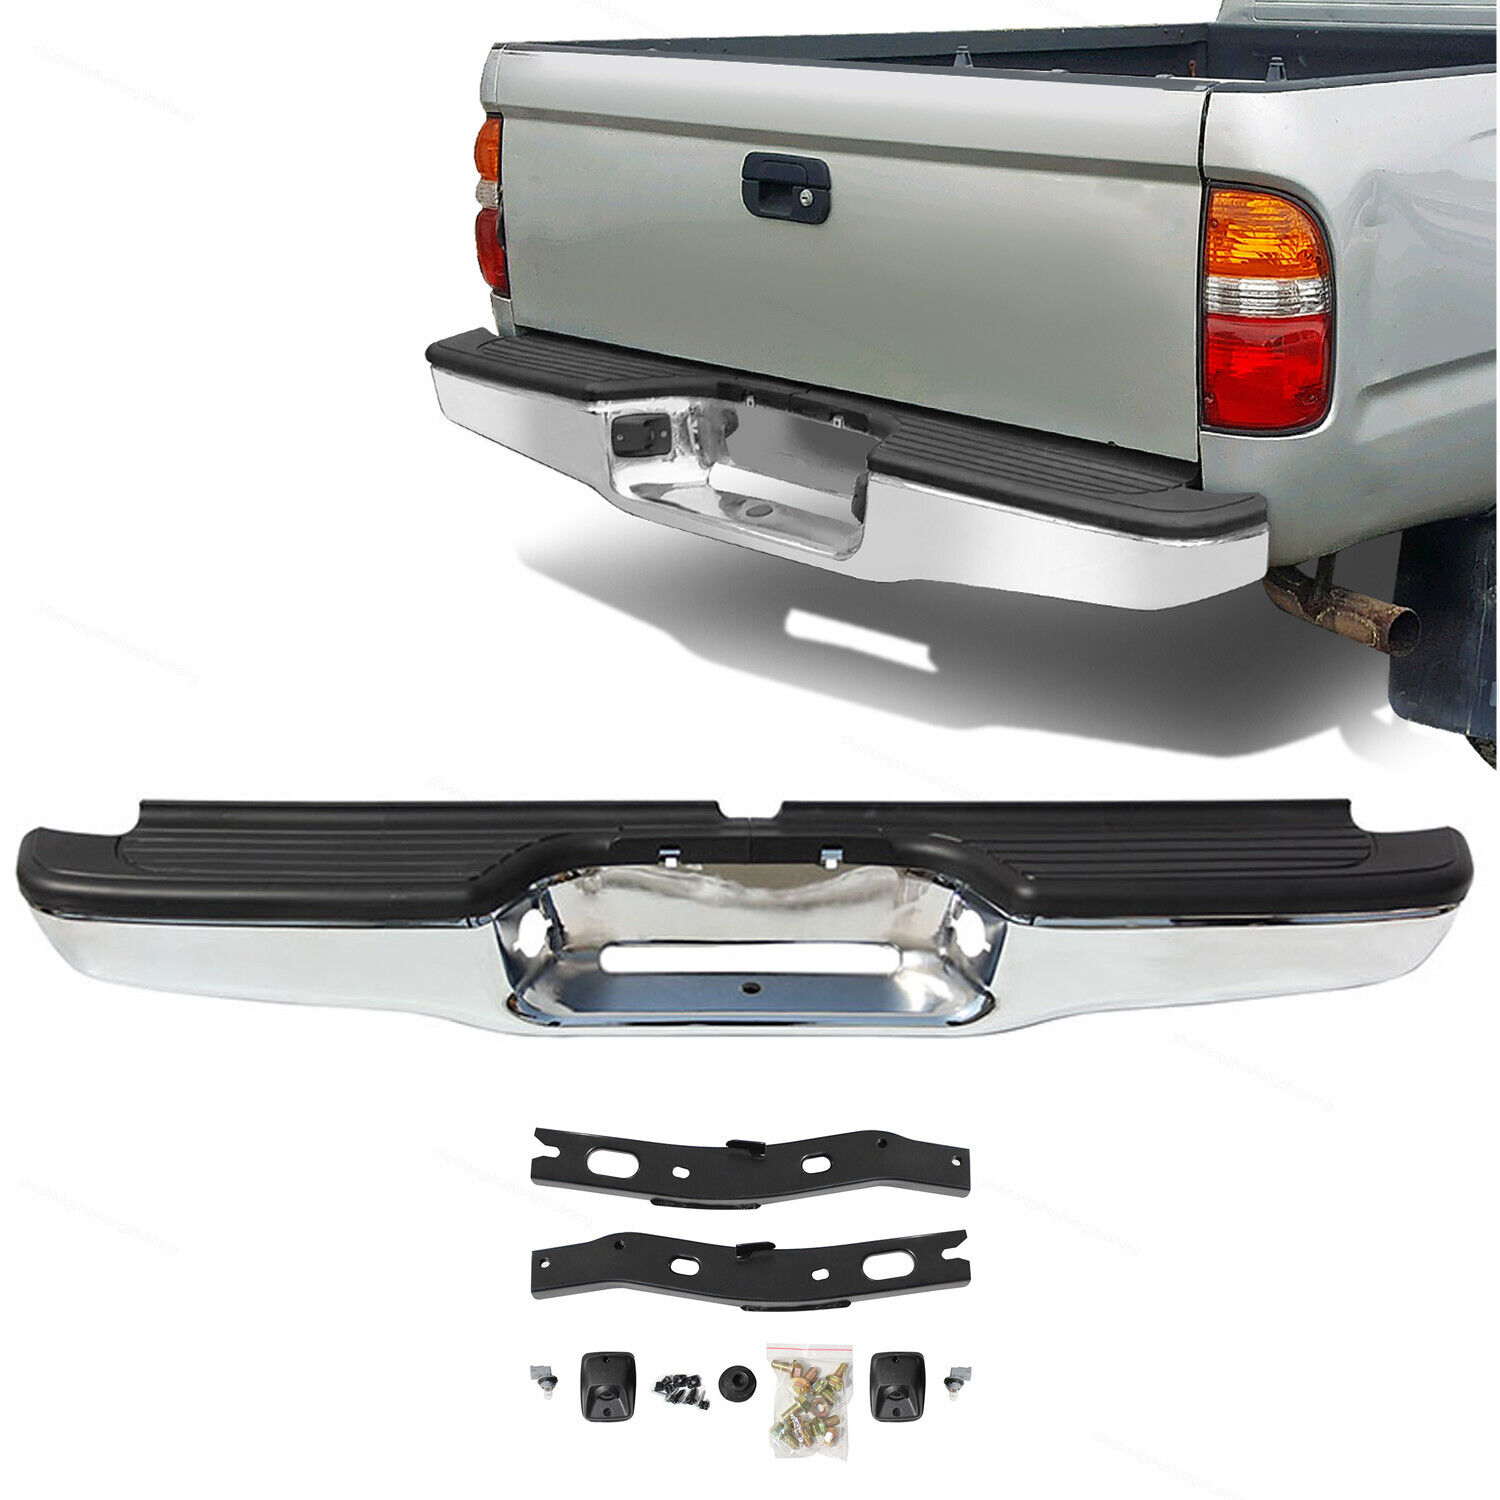 ASSY Chrome Steel Rear Bumper For 1995-2004 Toyota Tacoma W/ License Lights